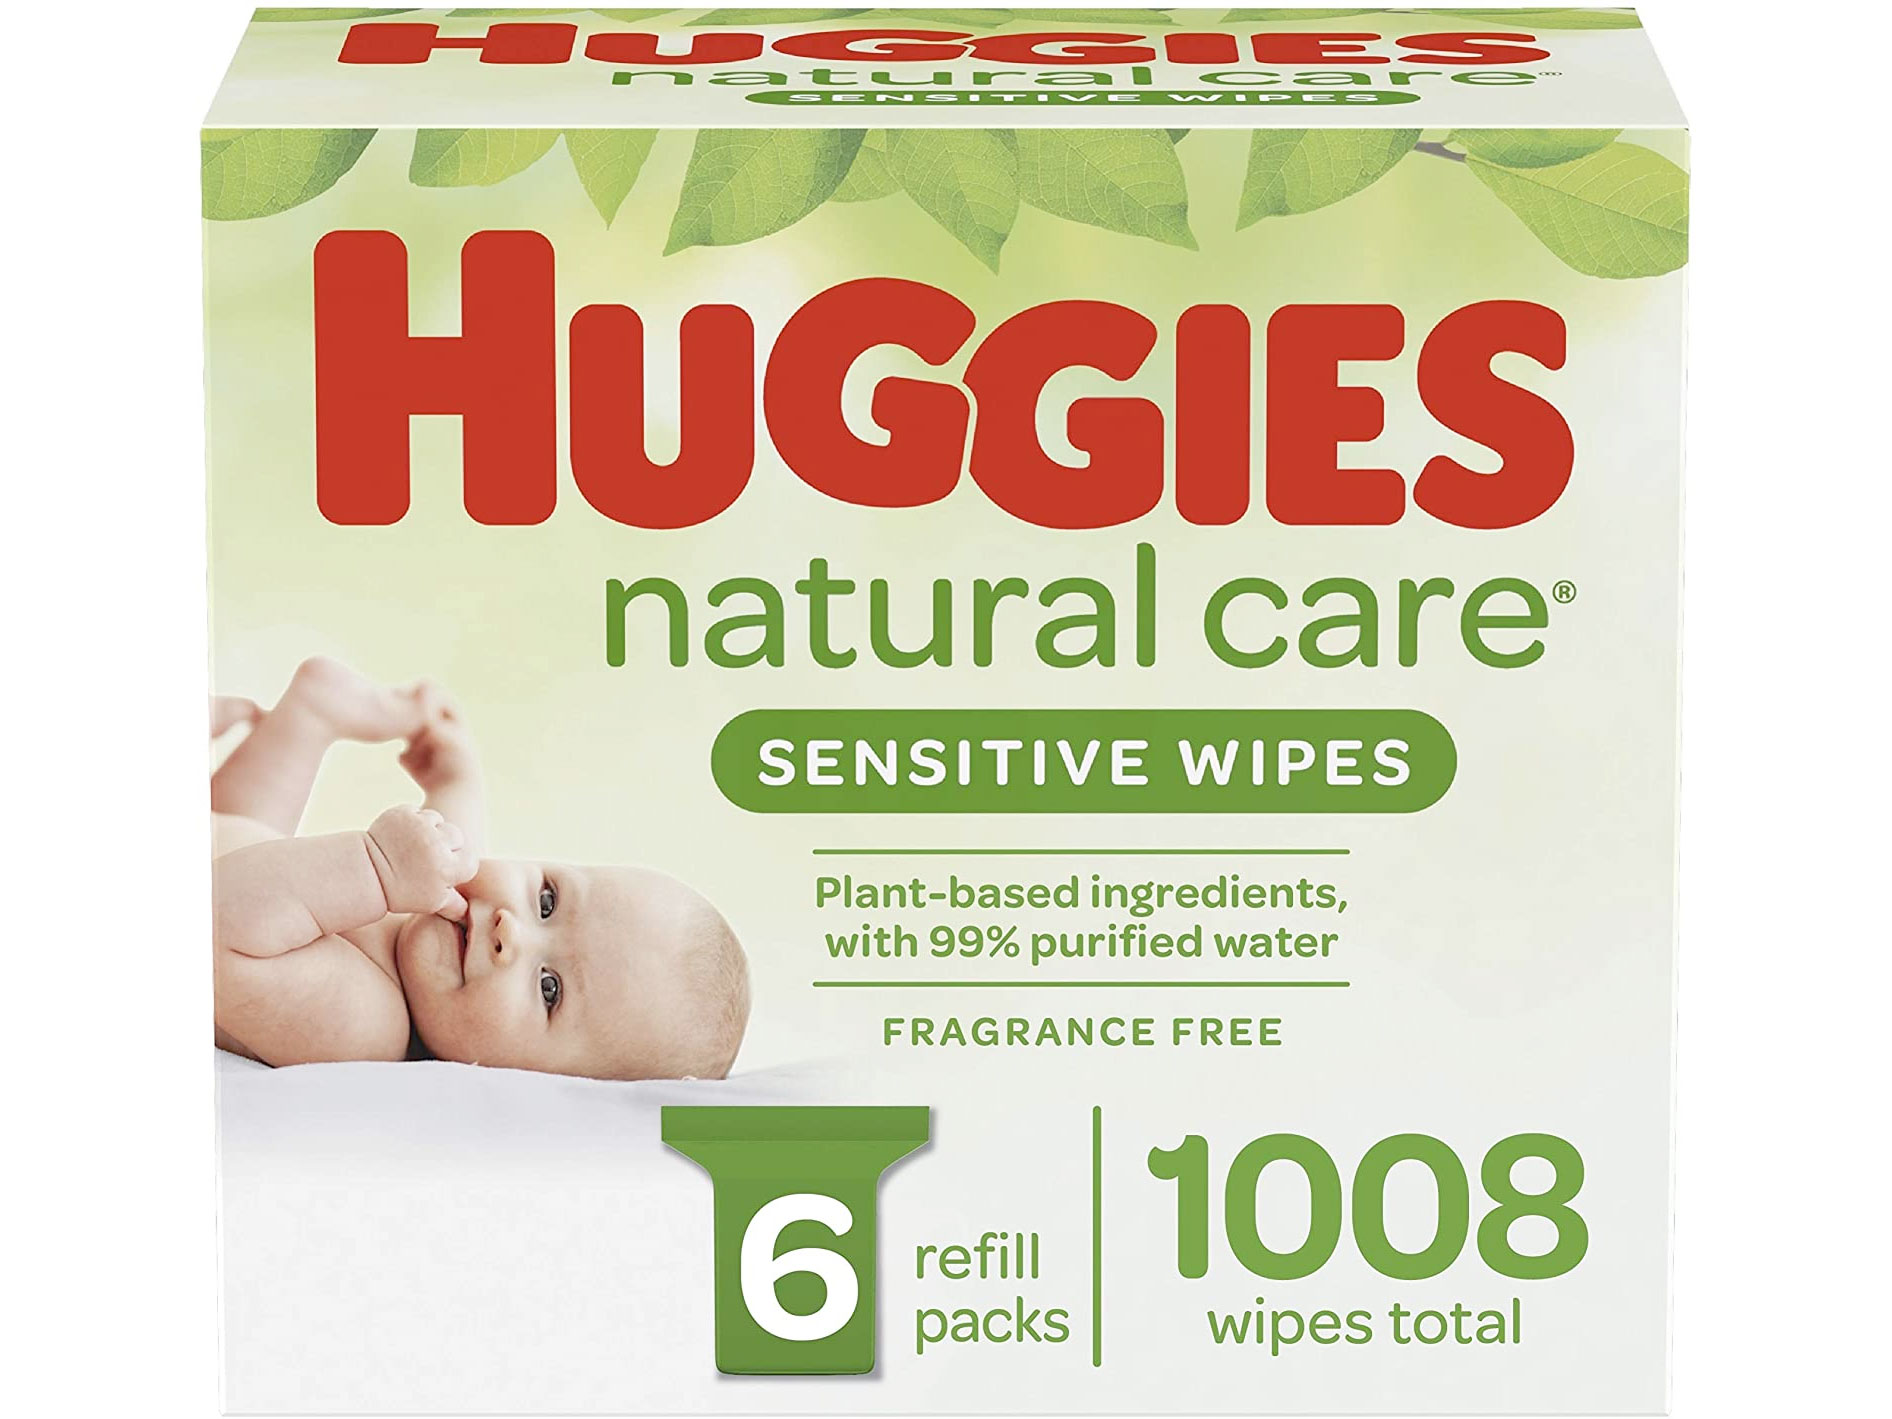 Amazon：Huggies Natural Care Sensitive Baby Wipes (1008 count)只賣$18.97